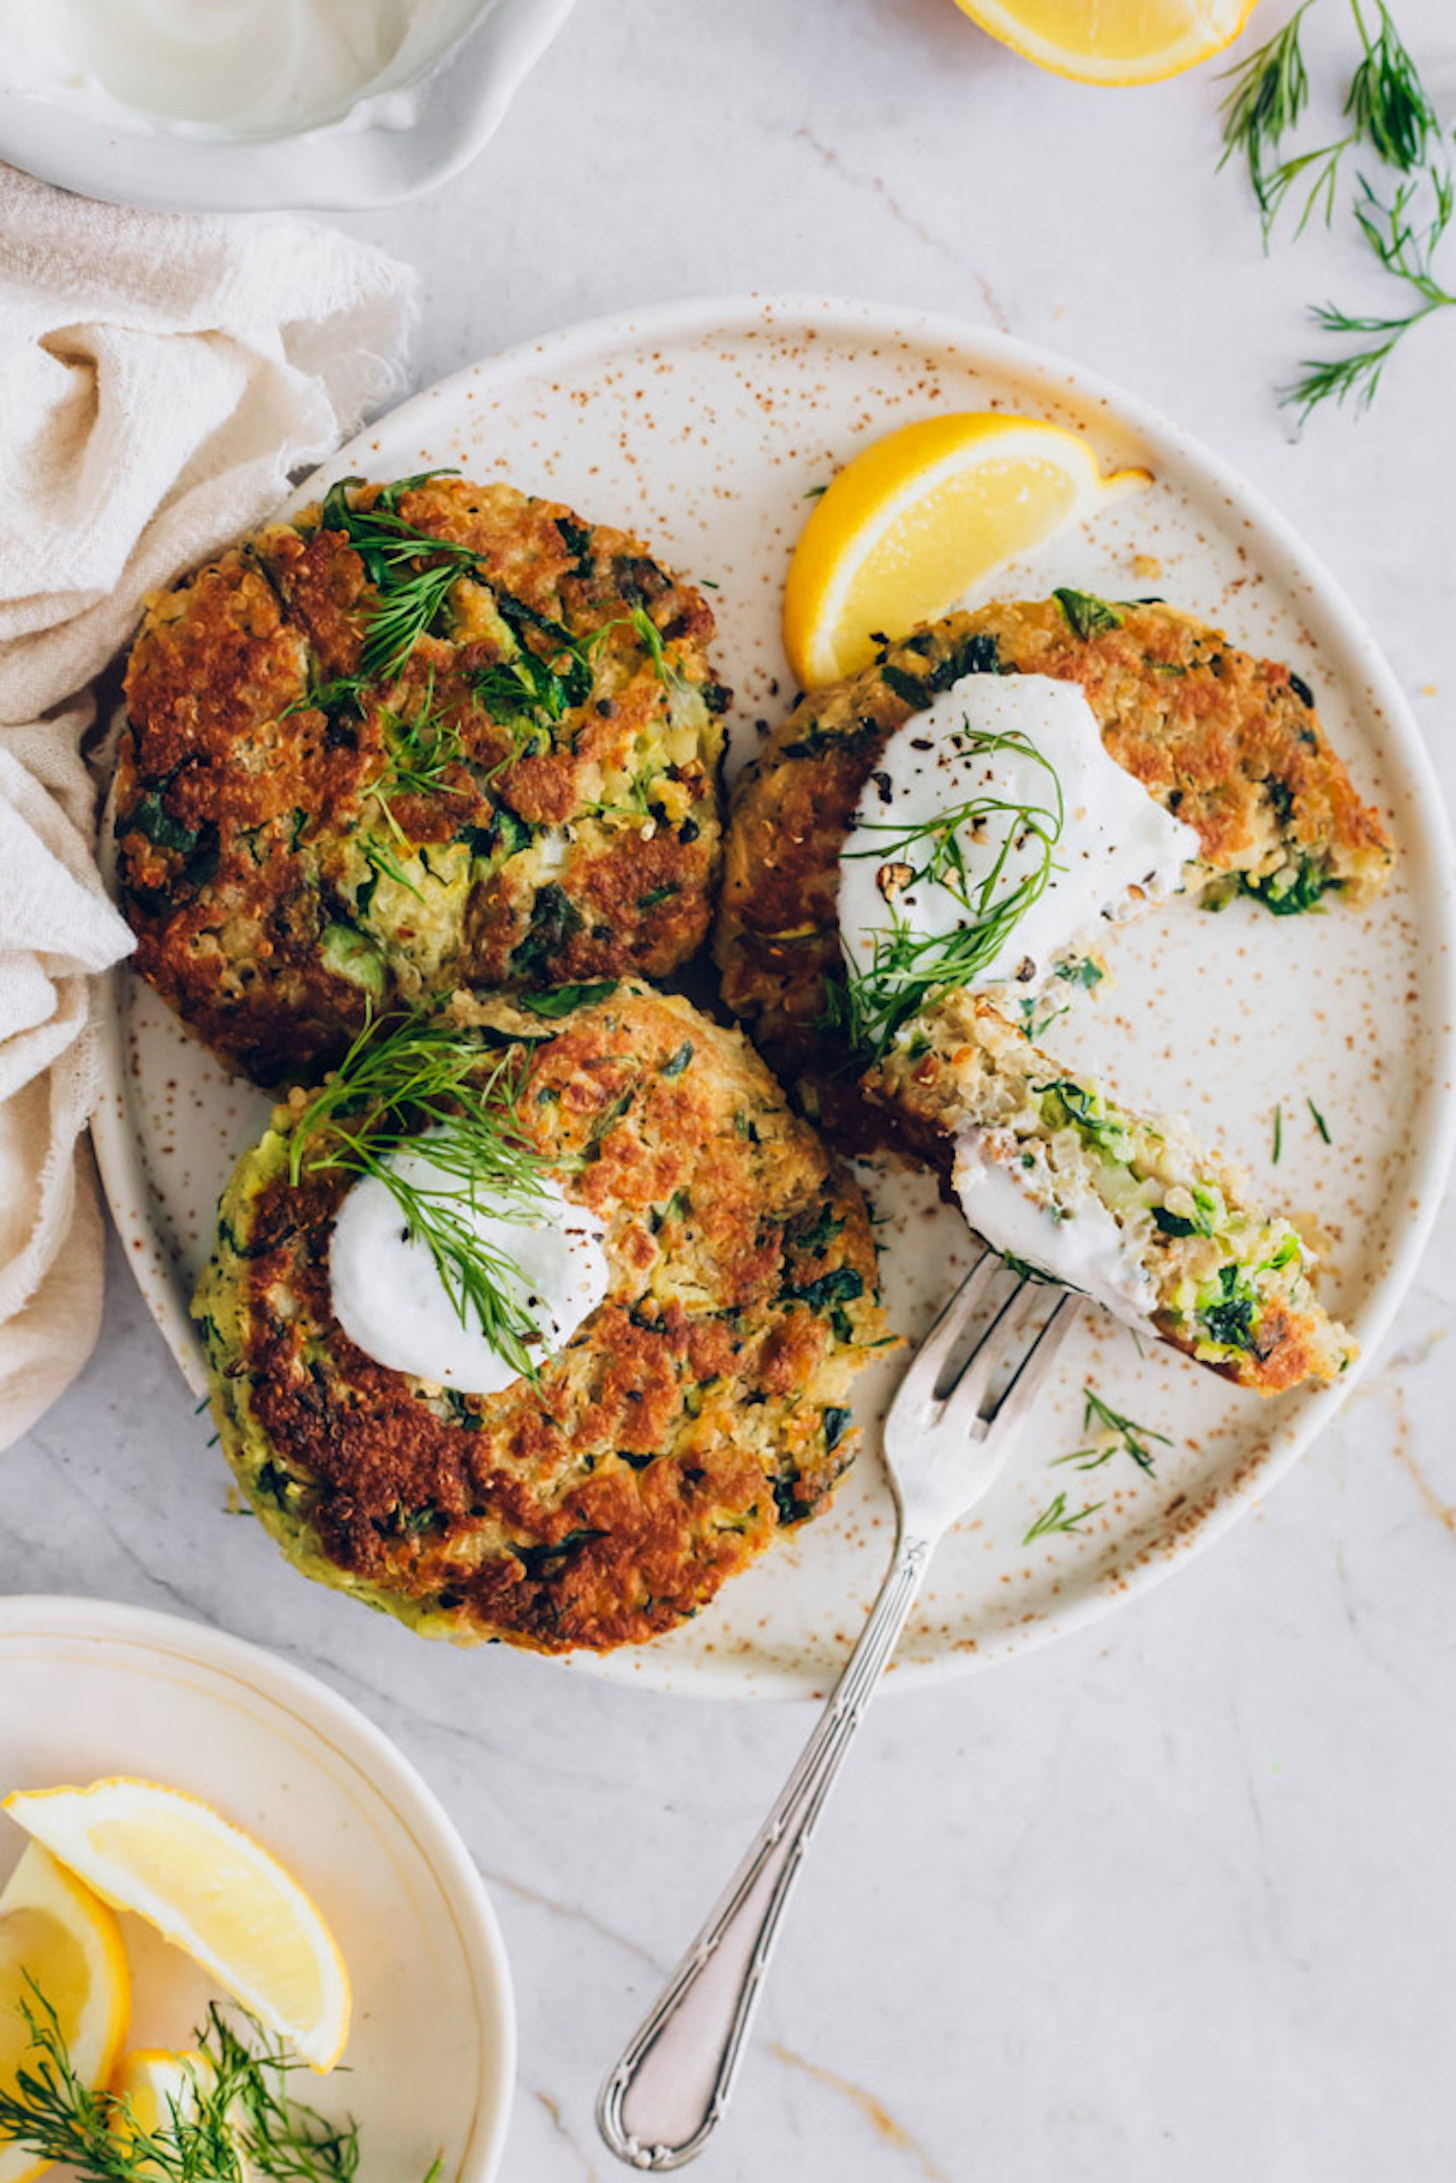 Plate of Dill Zucchini Fritters with lemon wedges